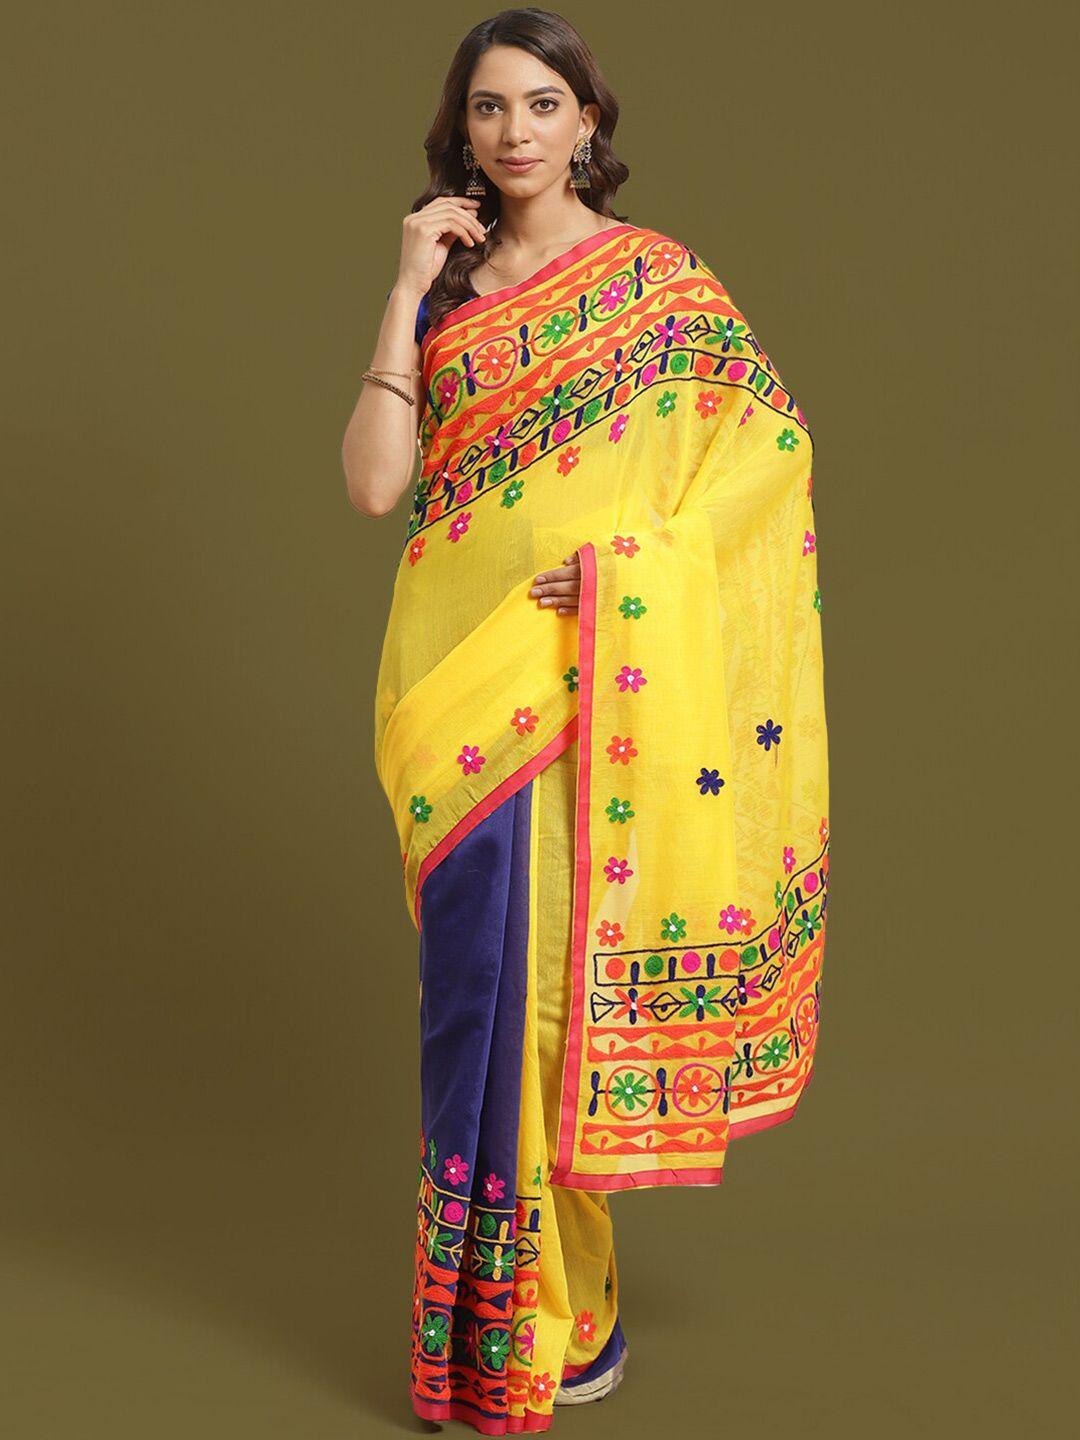 house-of-arli-floral-embroidered-silk-cotton-saree